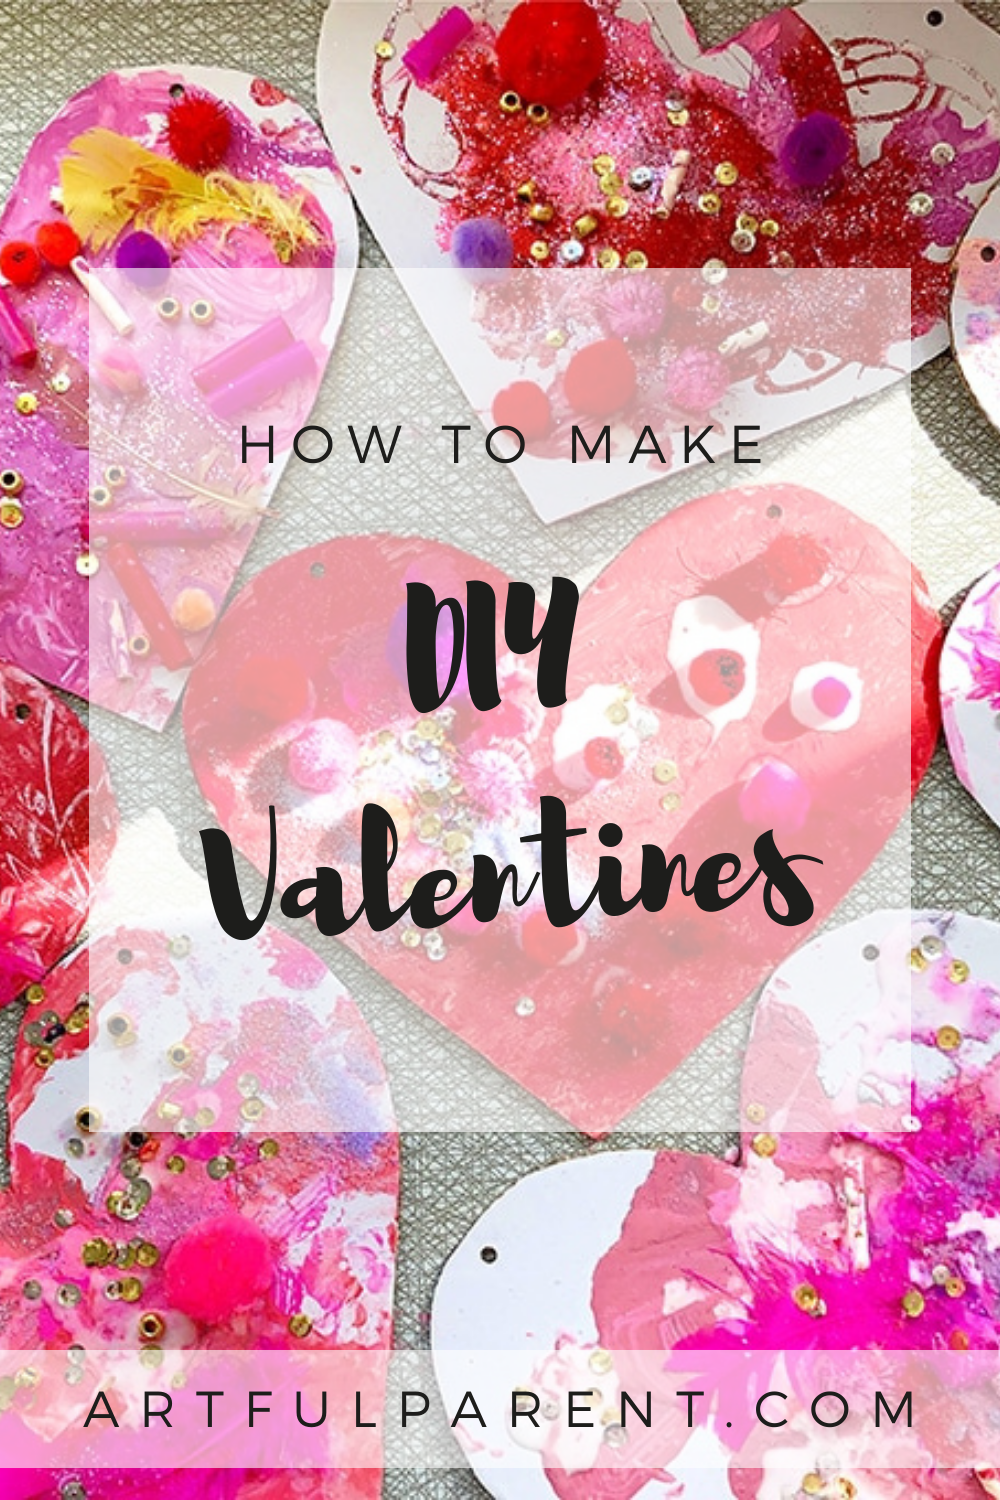 19 Easy DIY Valentine's Day Gifts That Kids Can Make